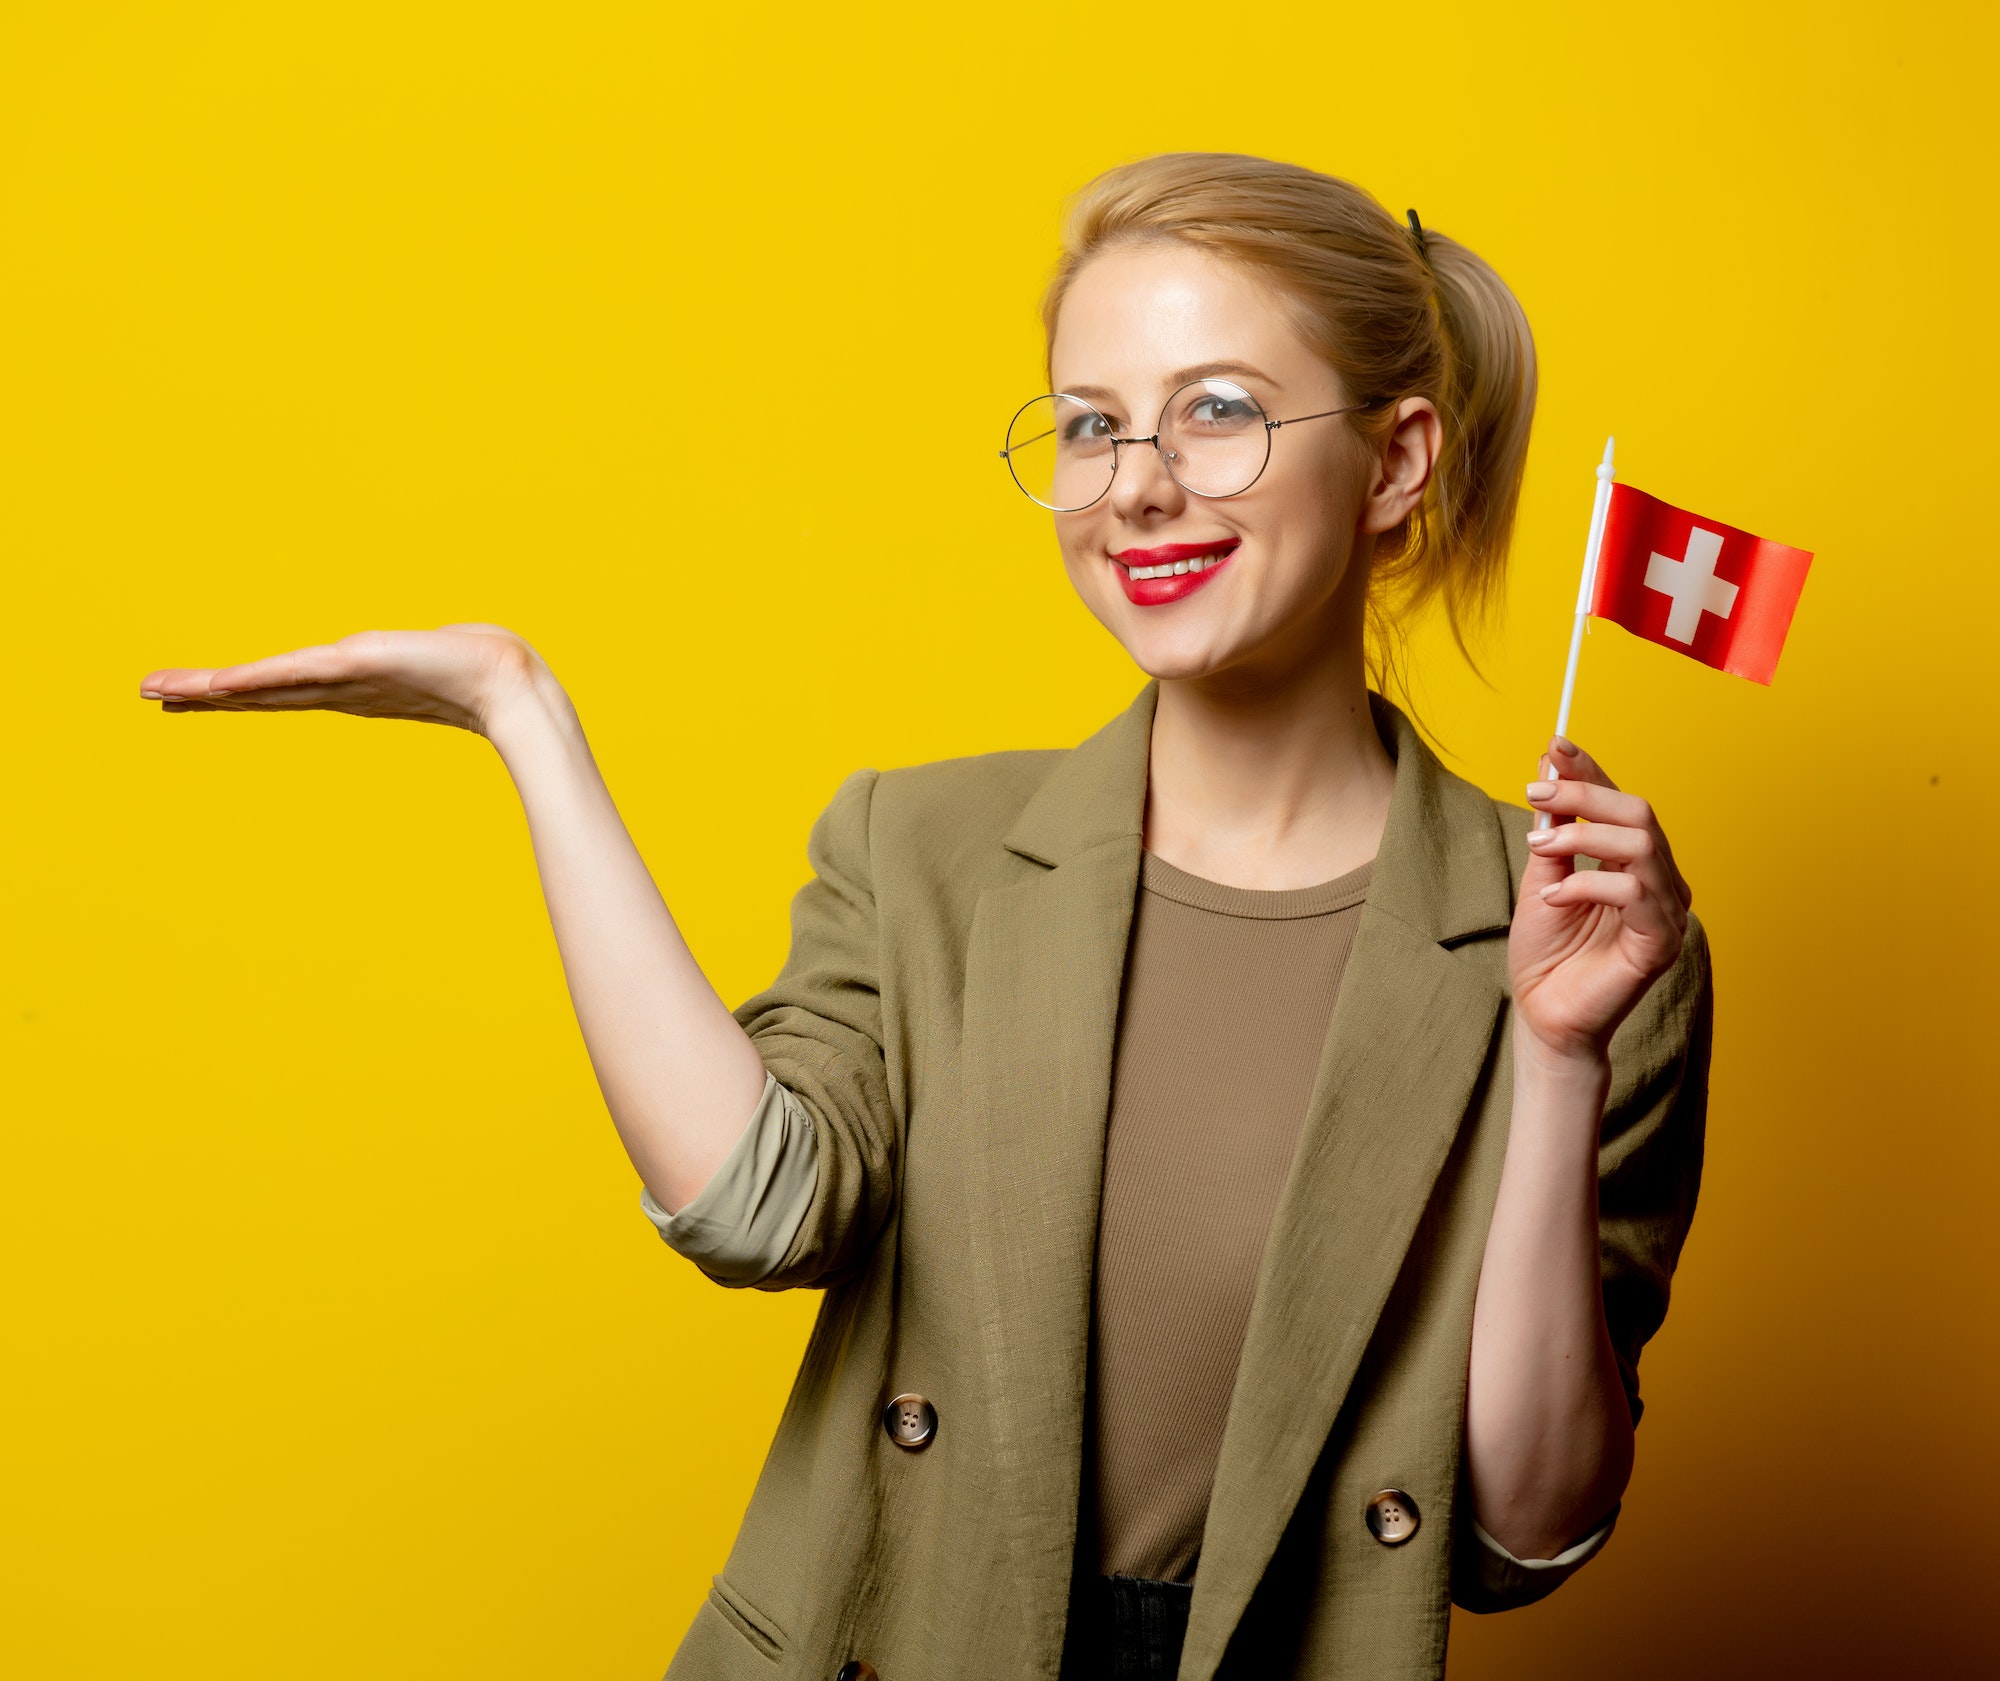 style blonde woman in jacket with swiss flag on yellow background 3